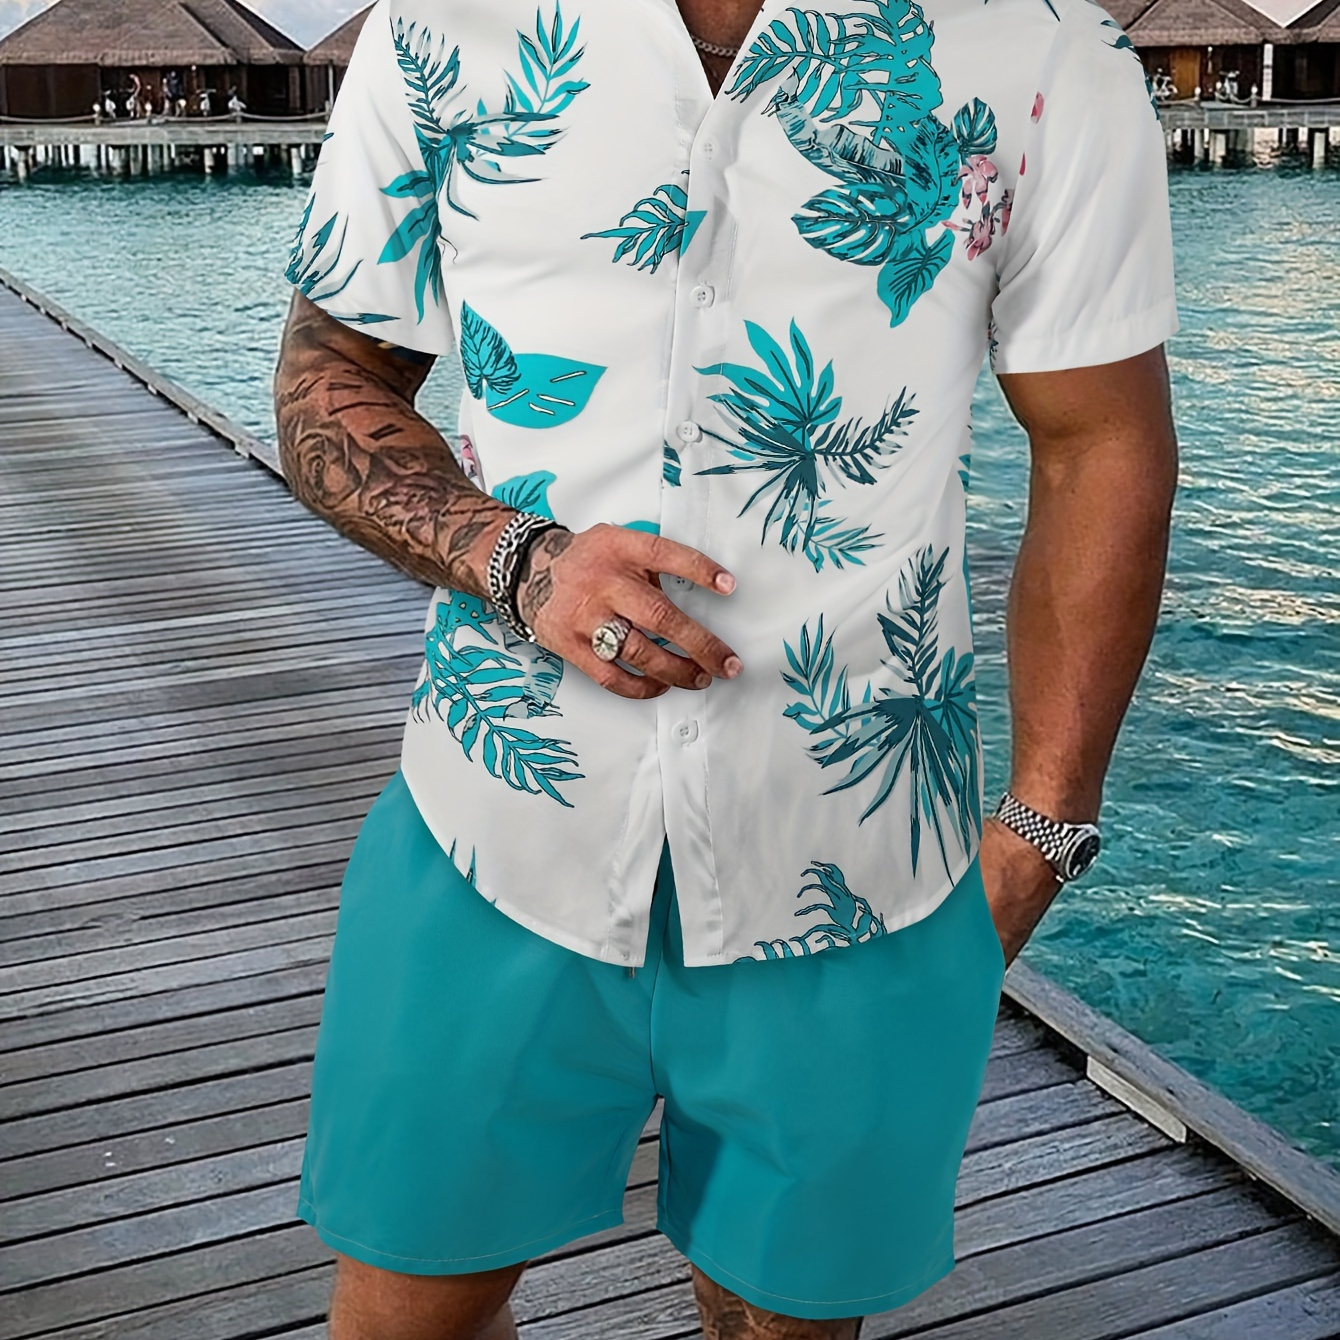 

Tropical Floral Print Men's 2pc Spring Summer Casual Shirt Co Ord Set With Shorts, Button-up, Collared, Beachwear, Resort Style Outfit, For Summer Outdoor